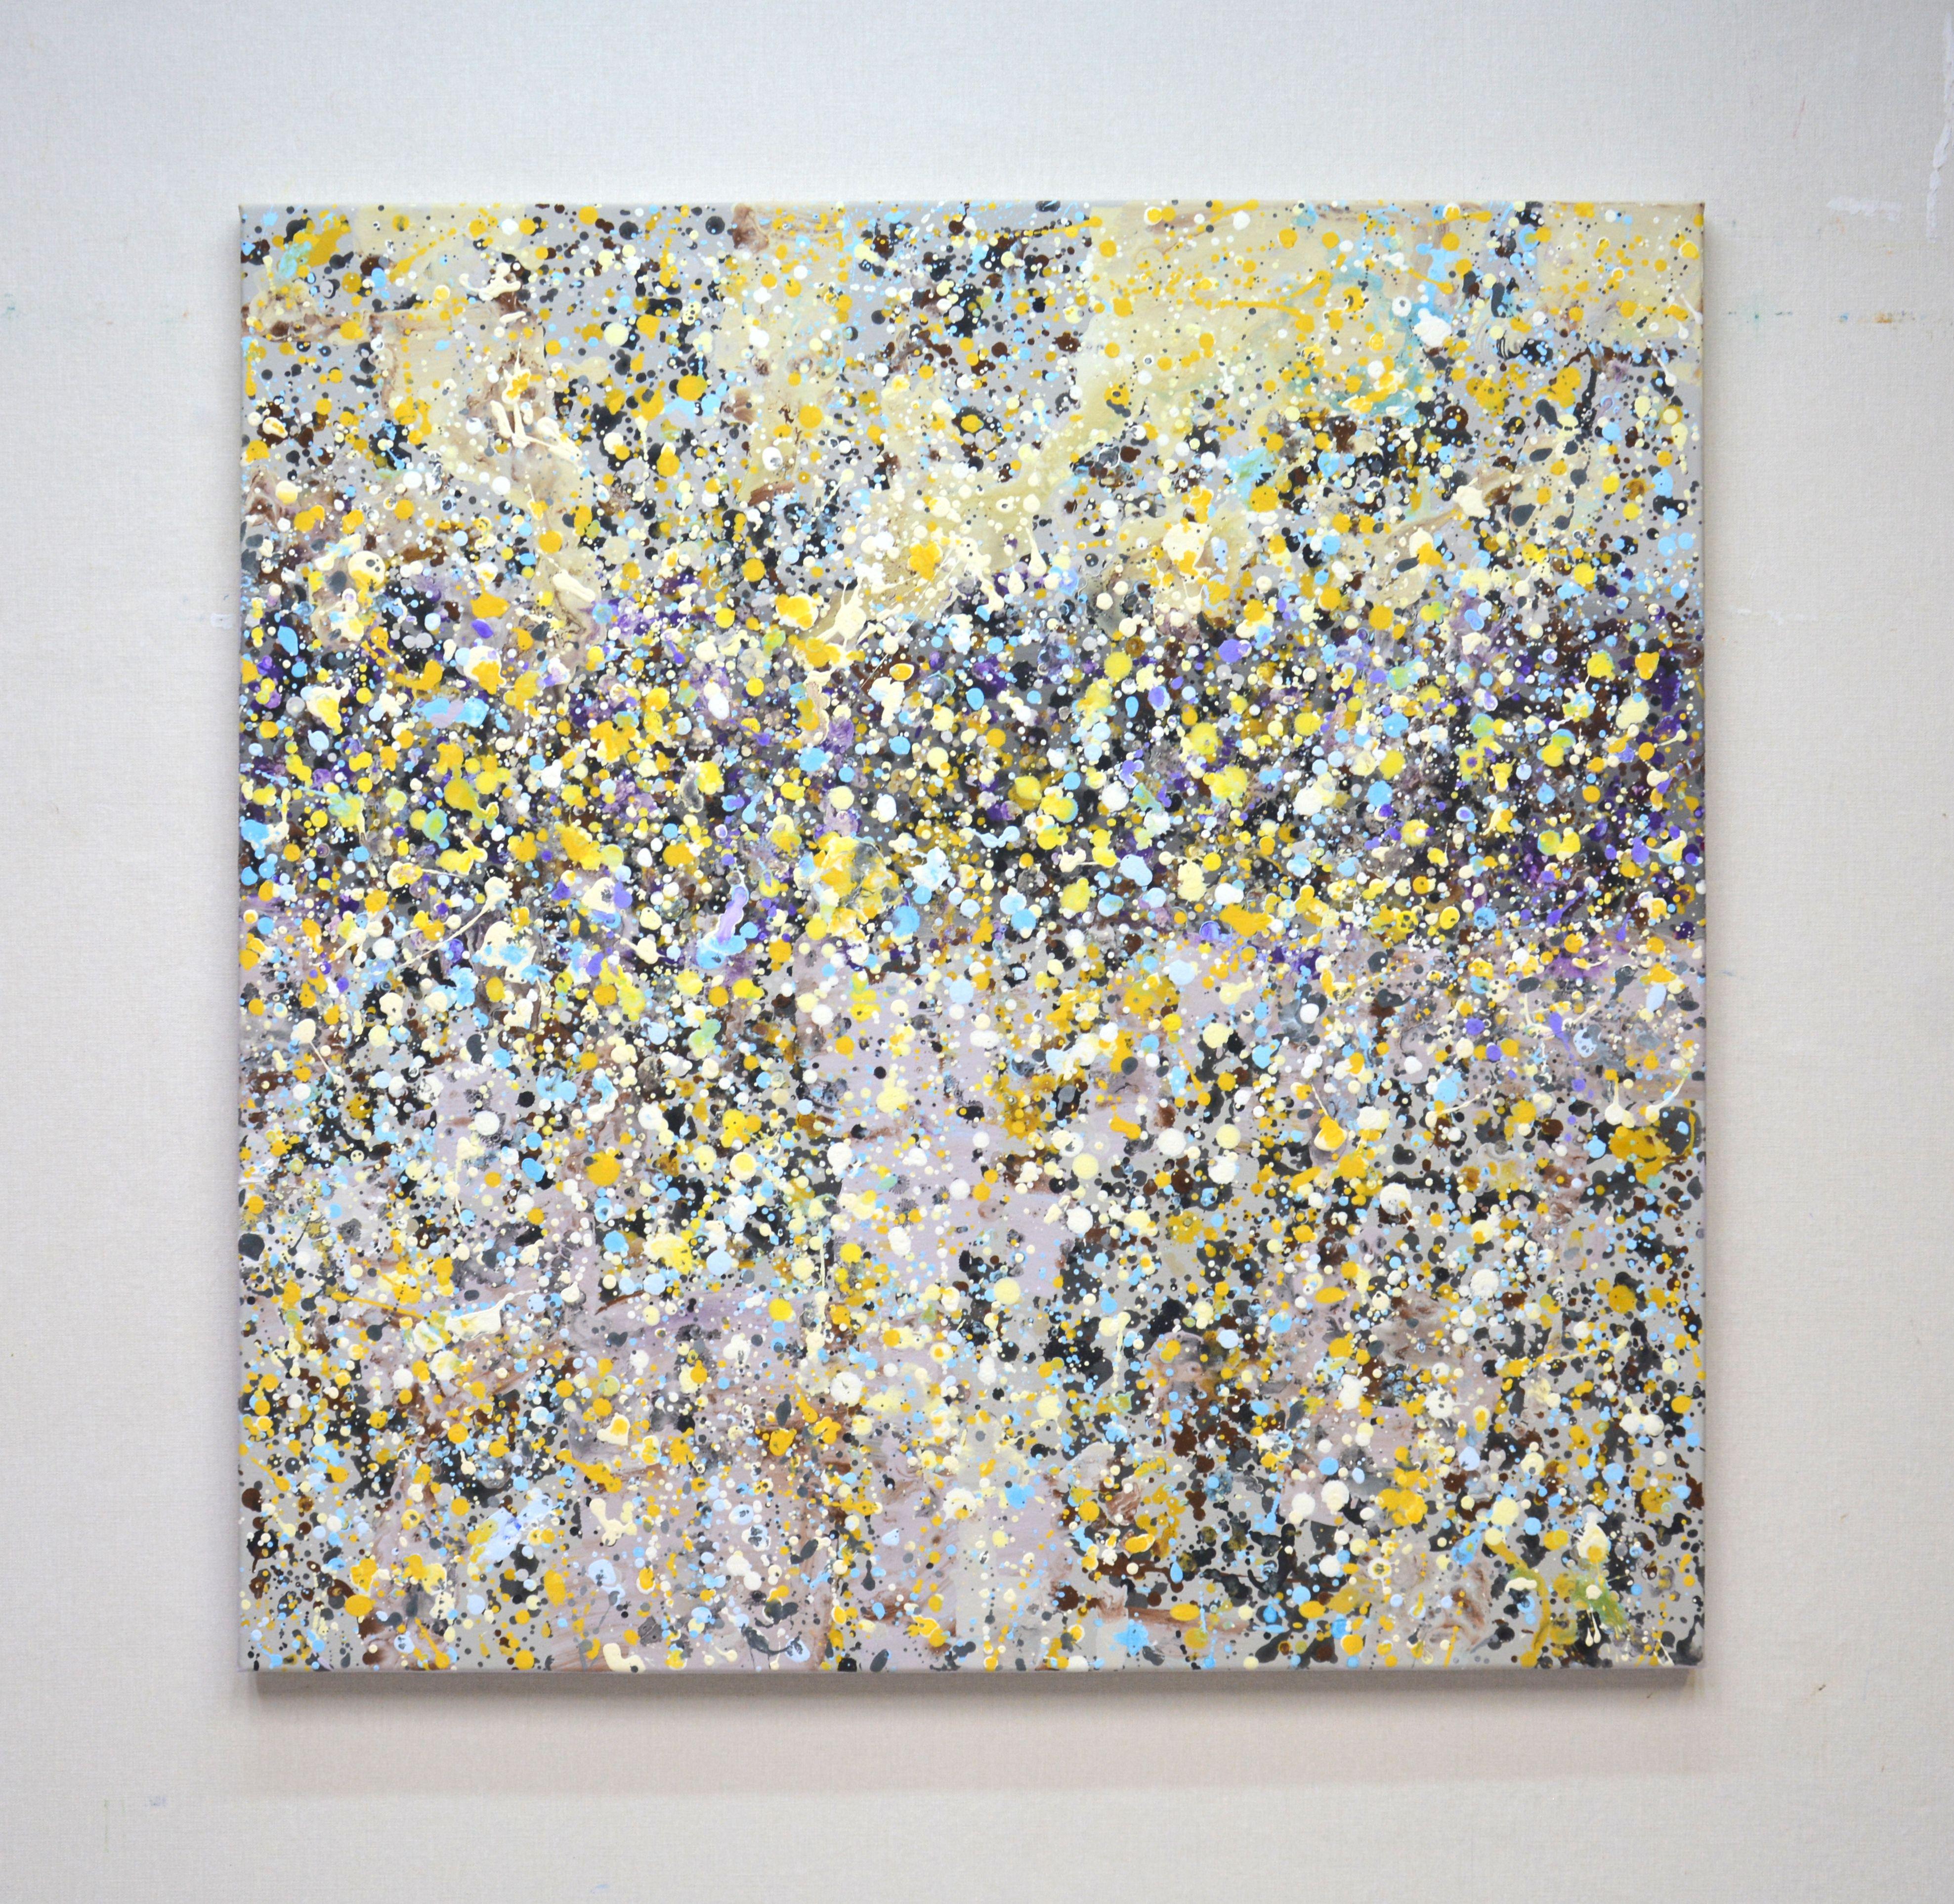 Harmony 2. A modern, expressive, abstract painting created by drops and splashes of paint that sparkles and shimmers! Colors are superimposed on each other and also correspond to different points. There are a lot of colored drops, yellow, gray,